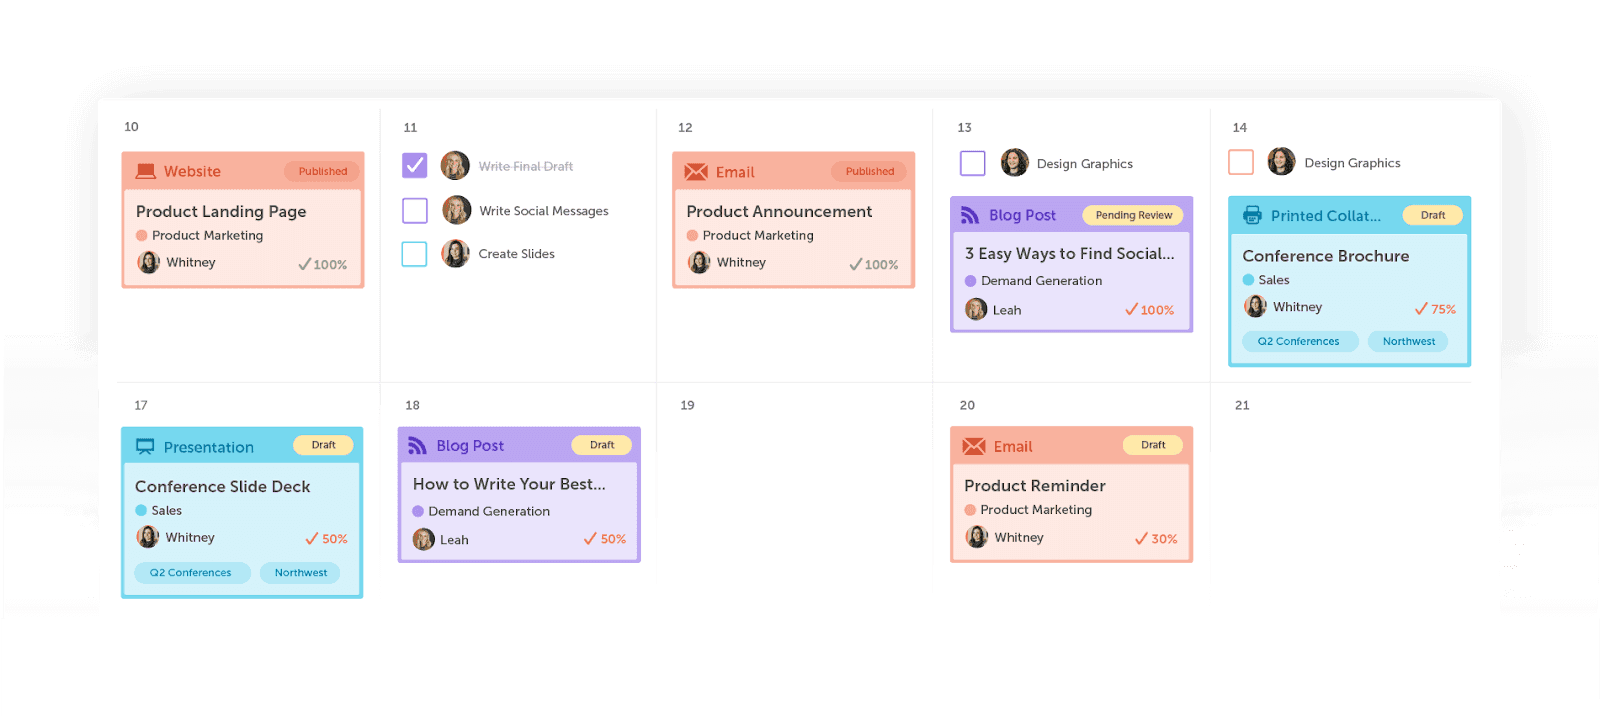 CoSchedule's project management tool